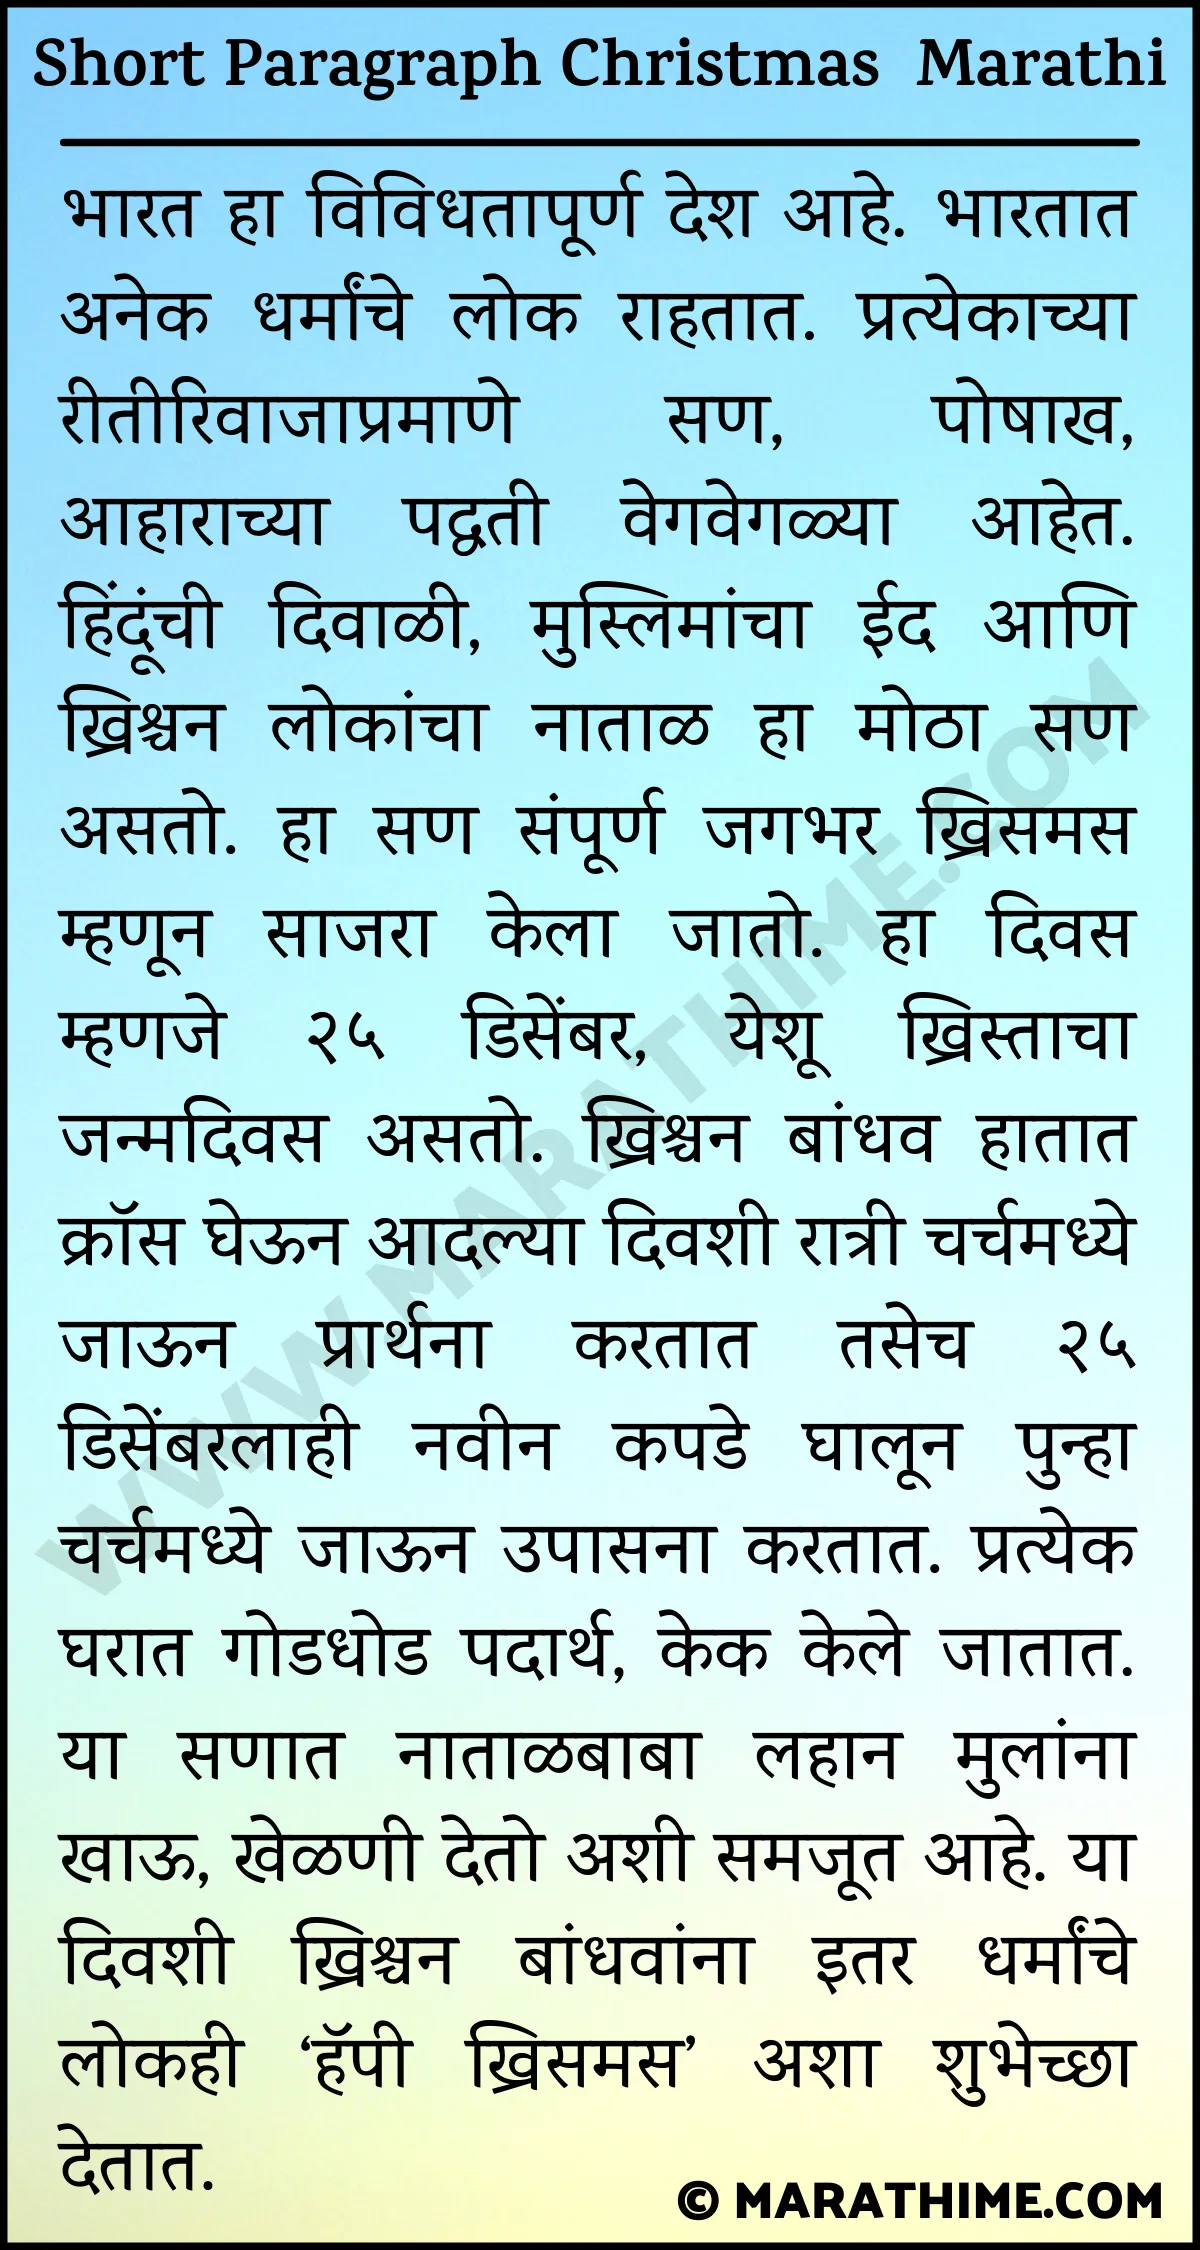 Short Paragraph on Christmas in Marathi